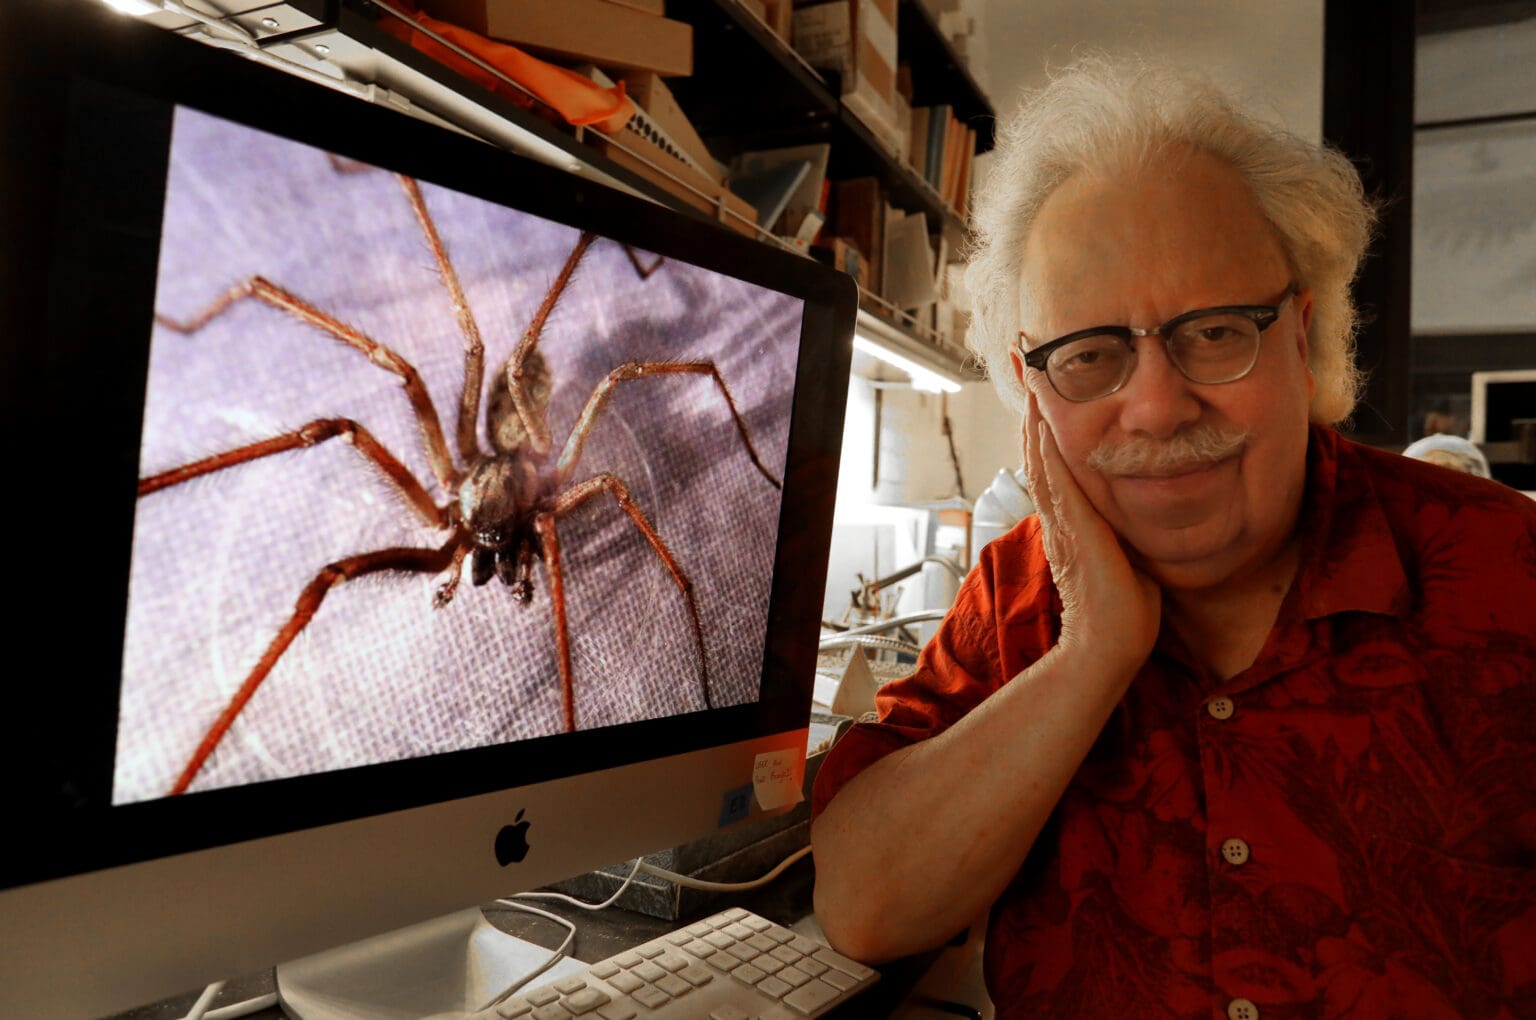 Spider expert Rod Crawford in his lab posing next to his computer showing a photo of a spider.